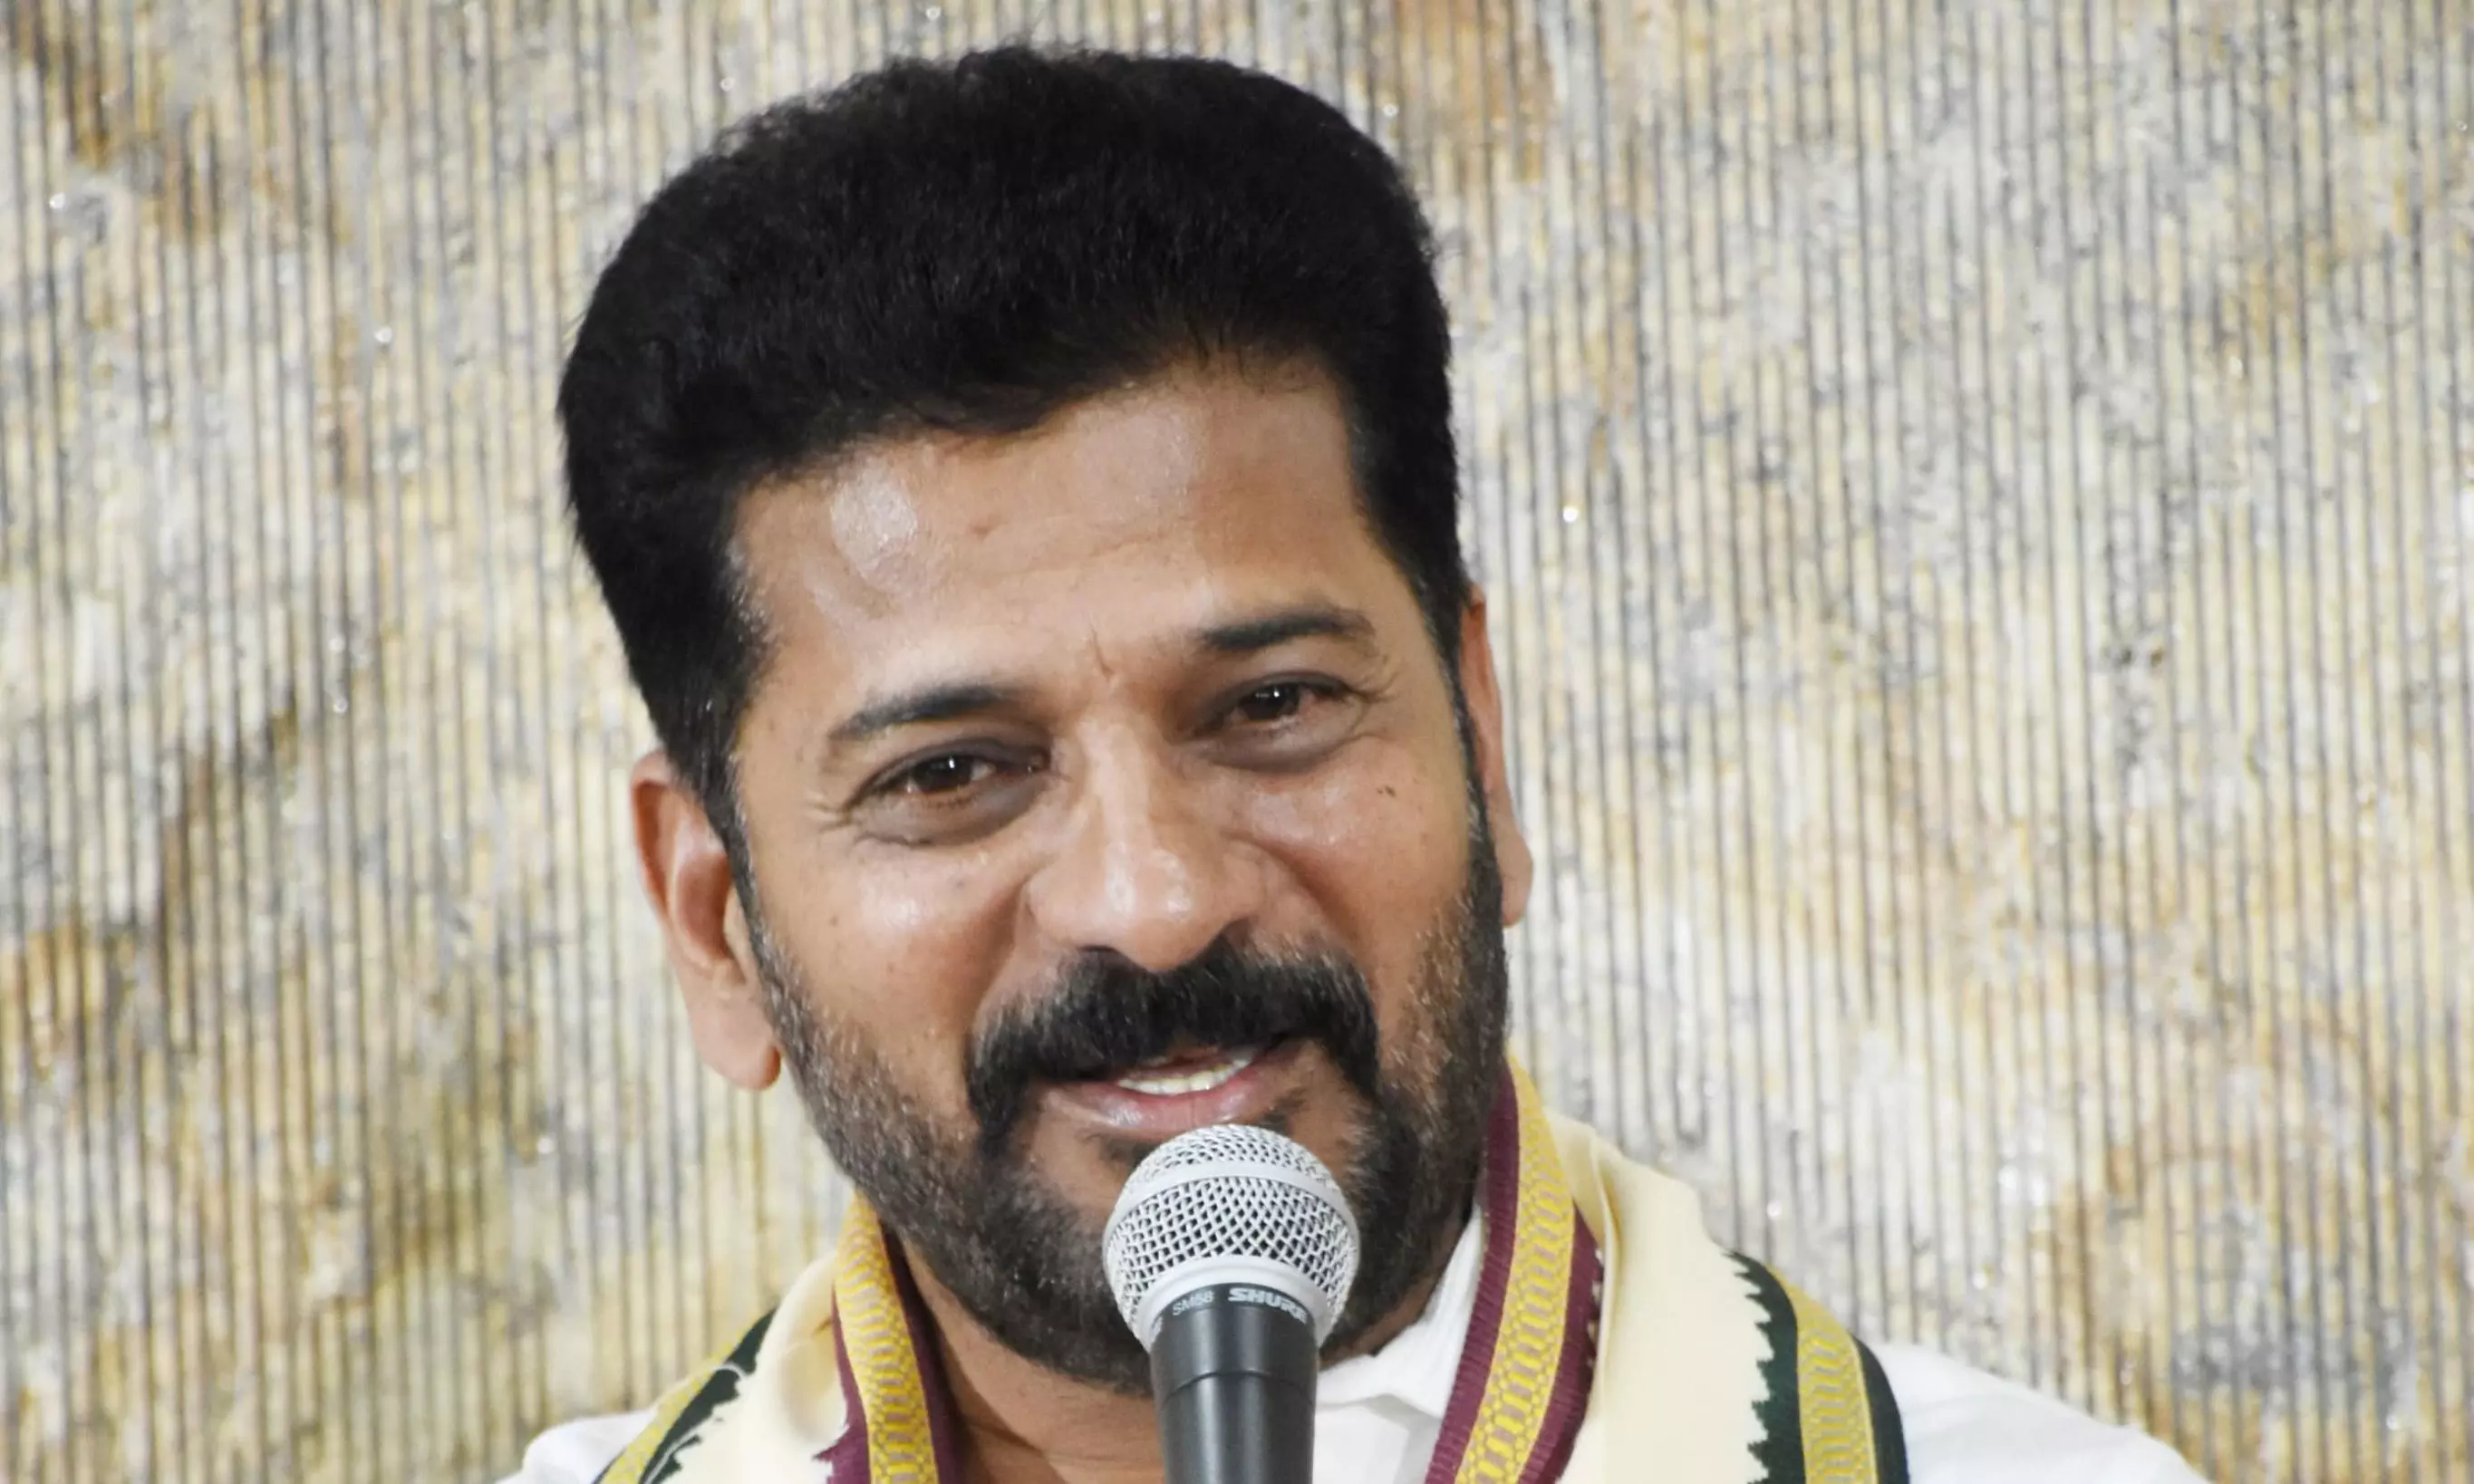 Osmania Hostels were Closed during KCR rule too, reminds Revanth Reddy